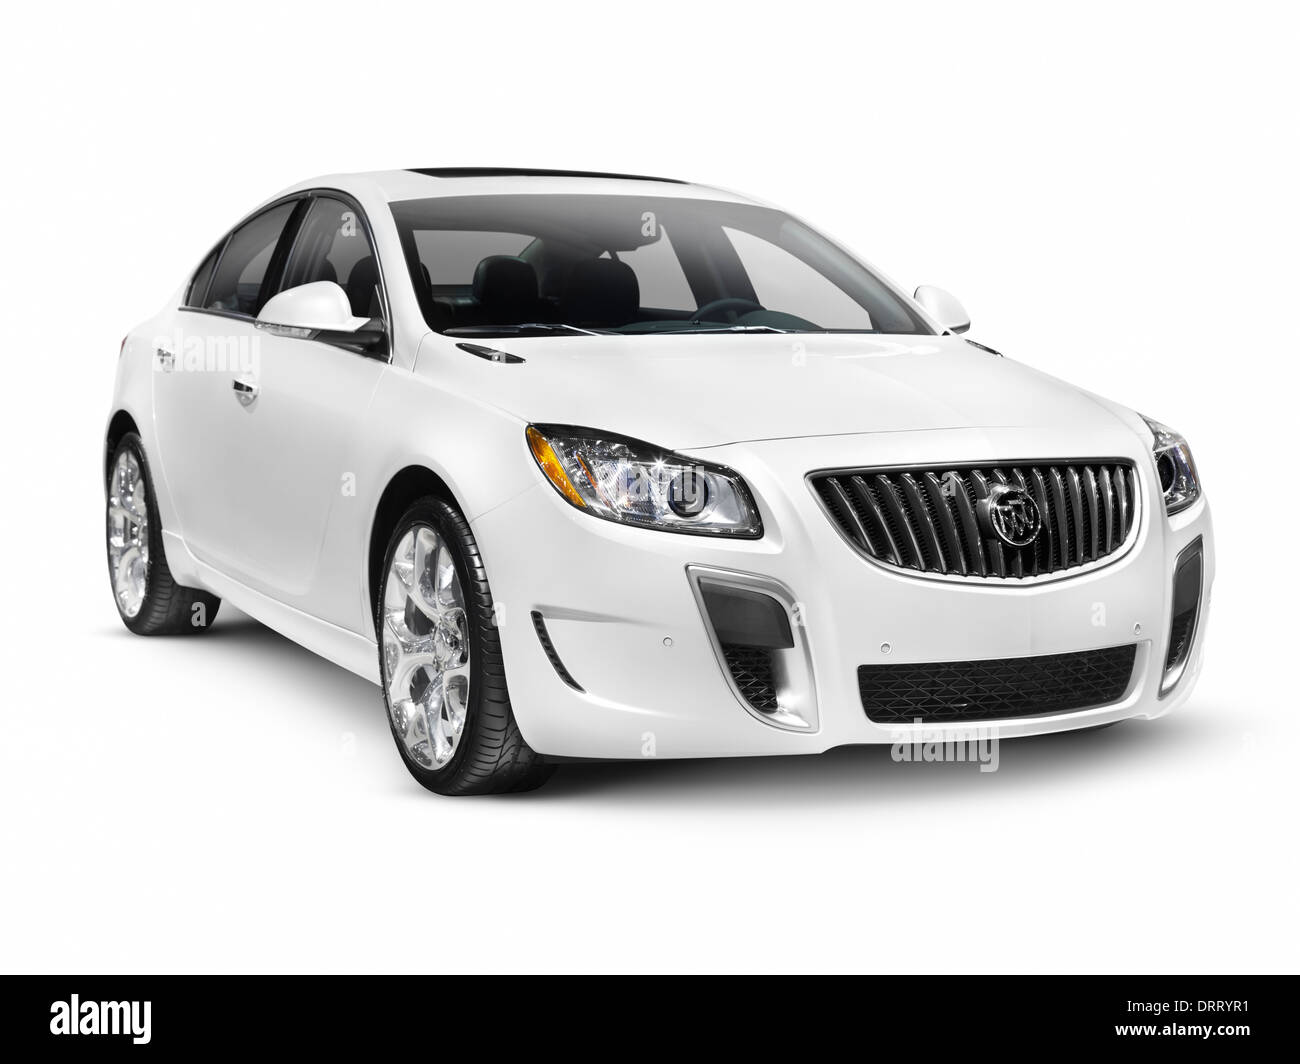 White 2012 Buick Regal GS, luxury sport sedan, isolated car on white background with clipping path Stock Photo